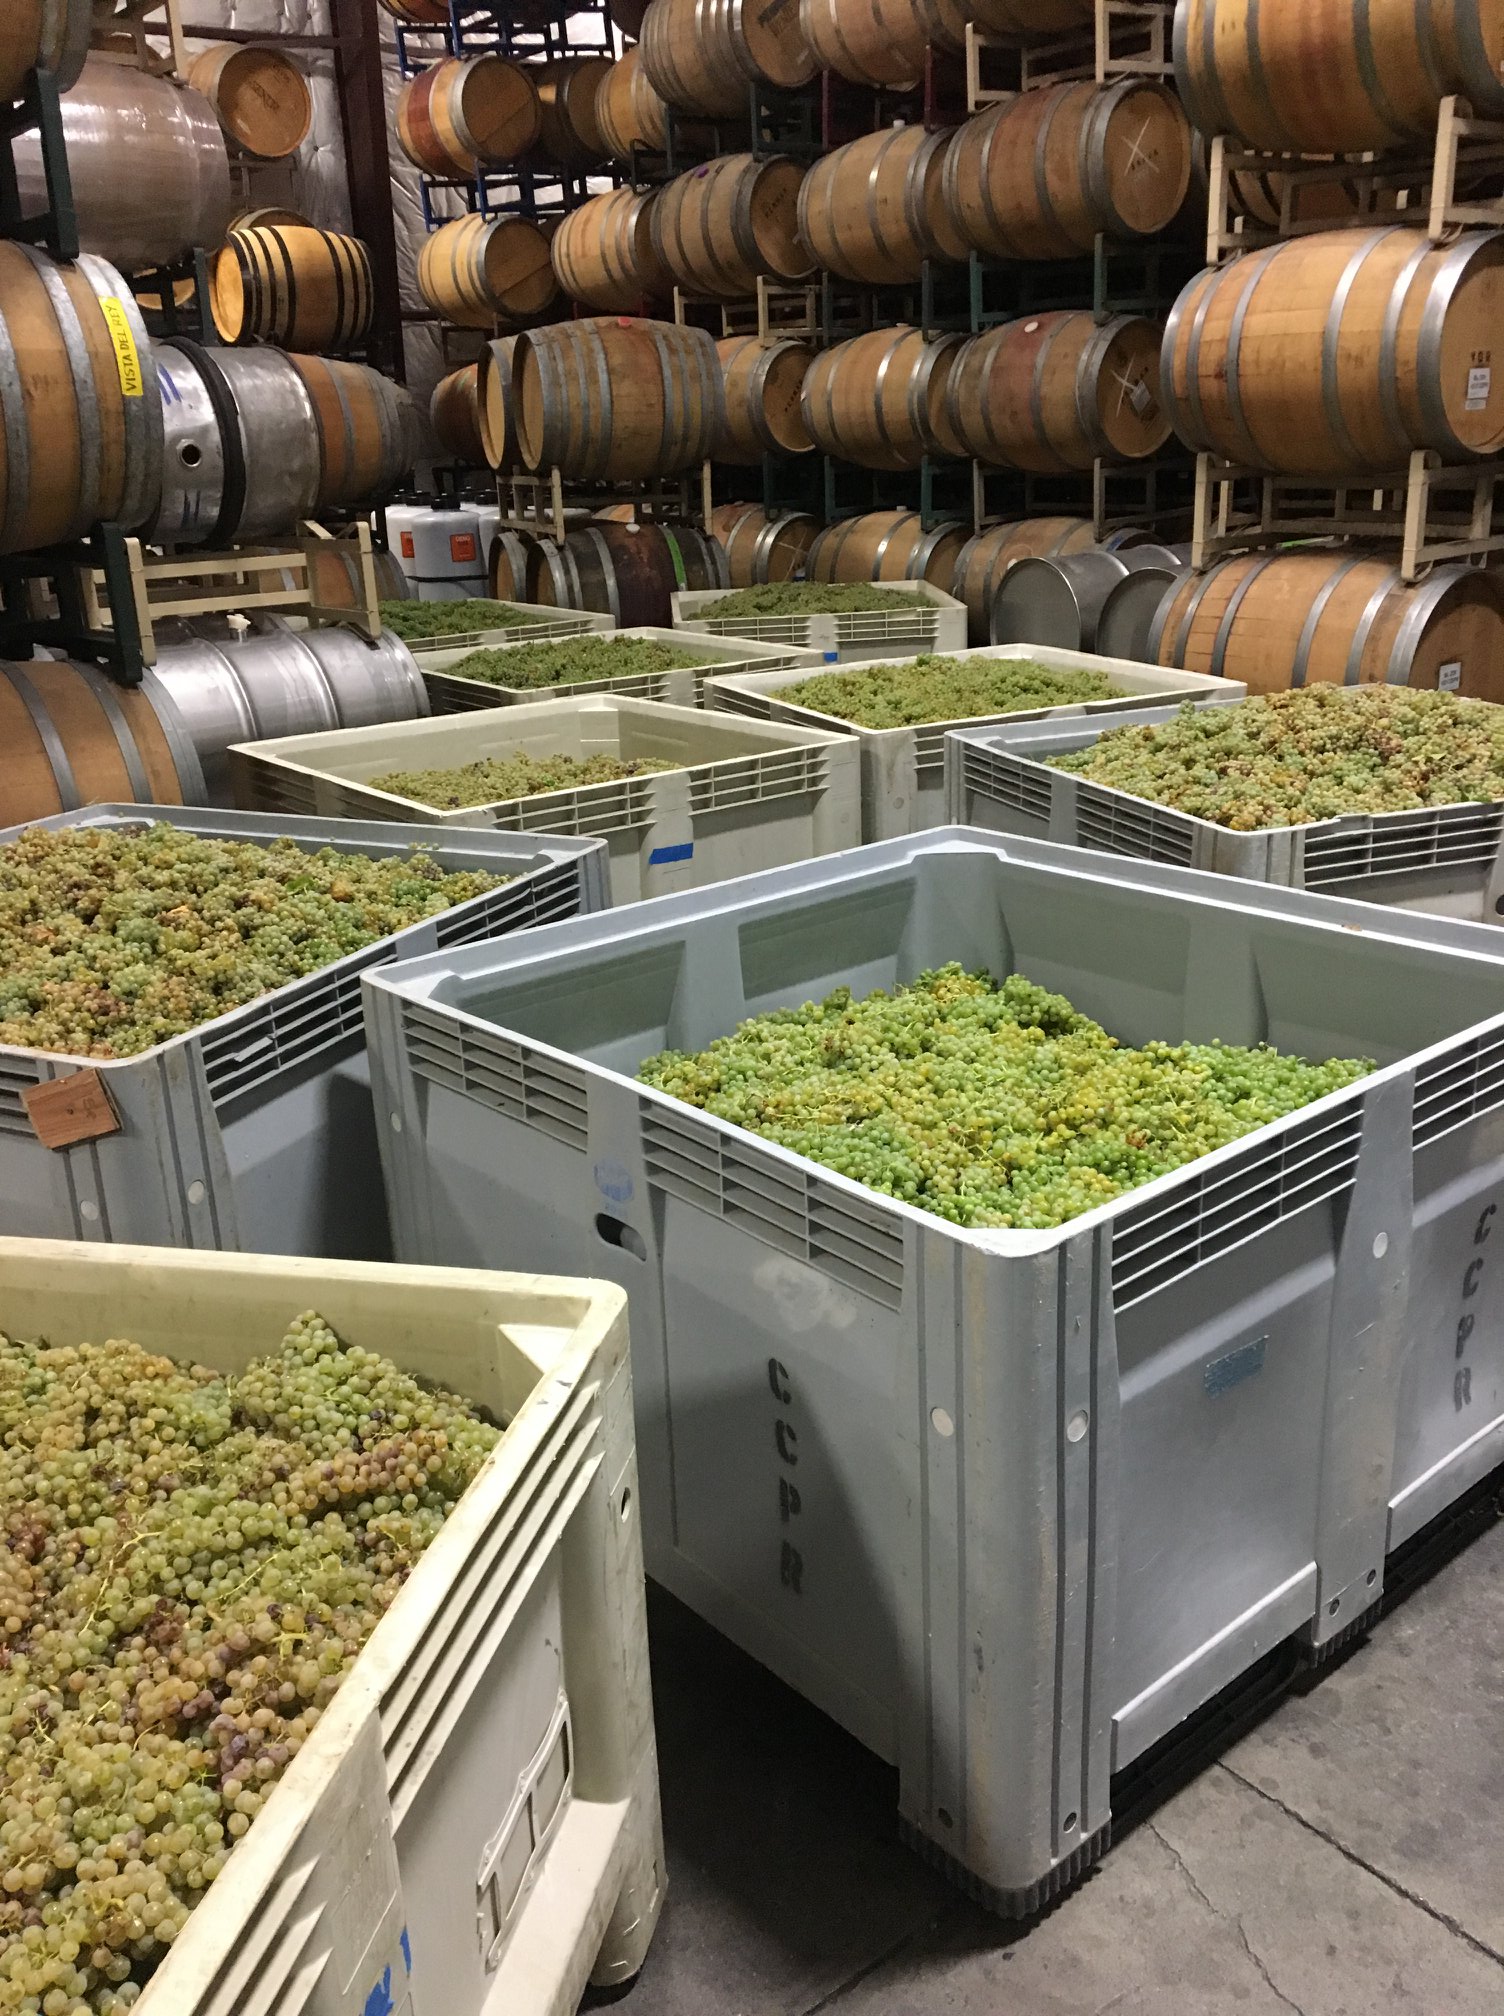 Bins of wine grapes in winery